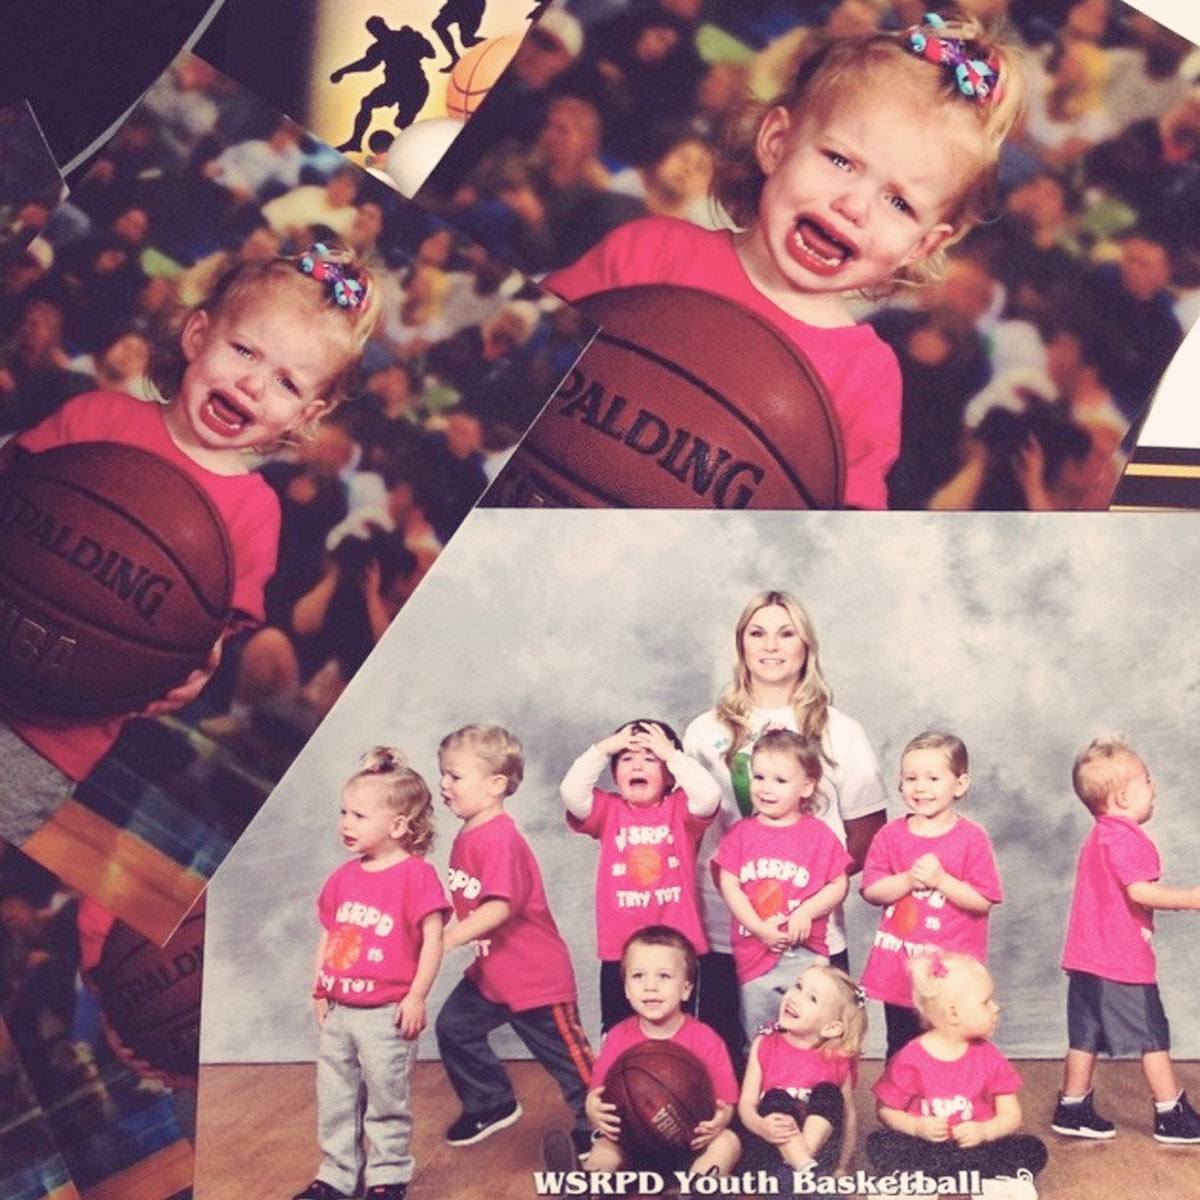 This Poor Toddler Basketball Team 'Just CAN'T EVEN' Today